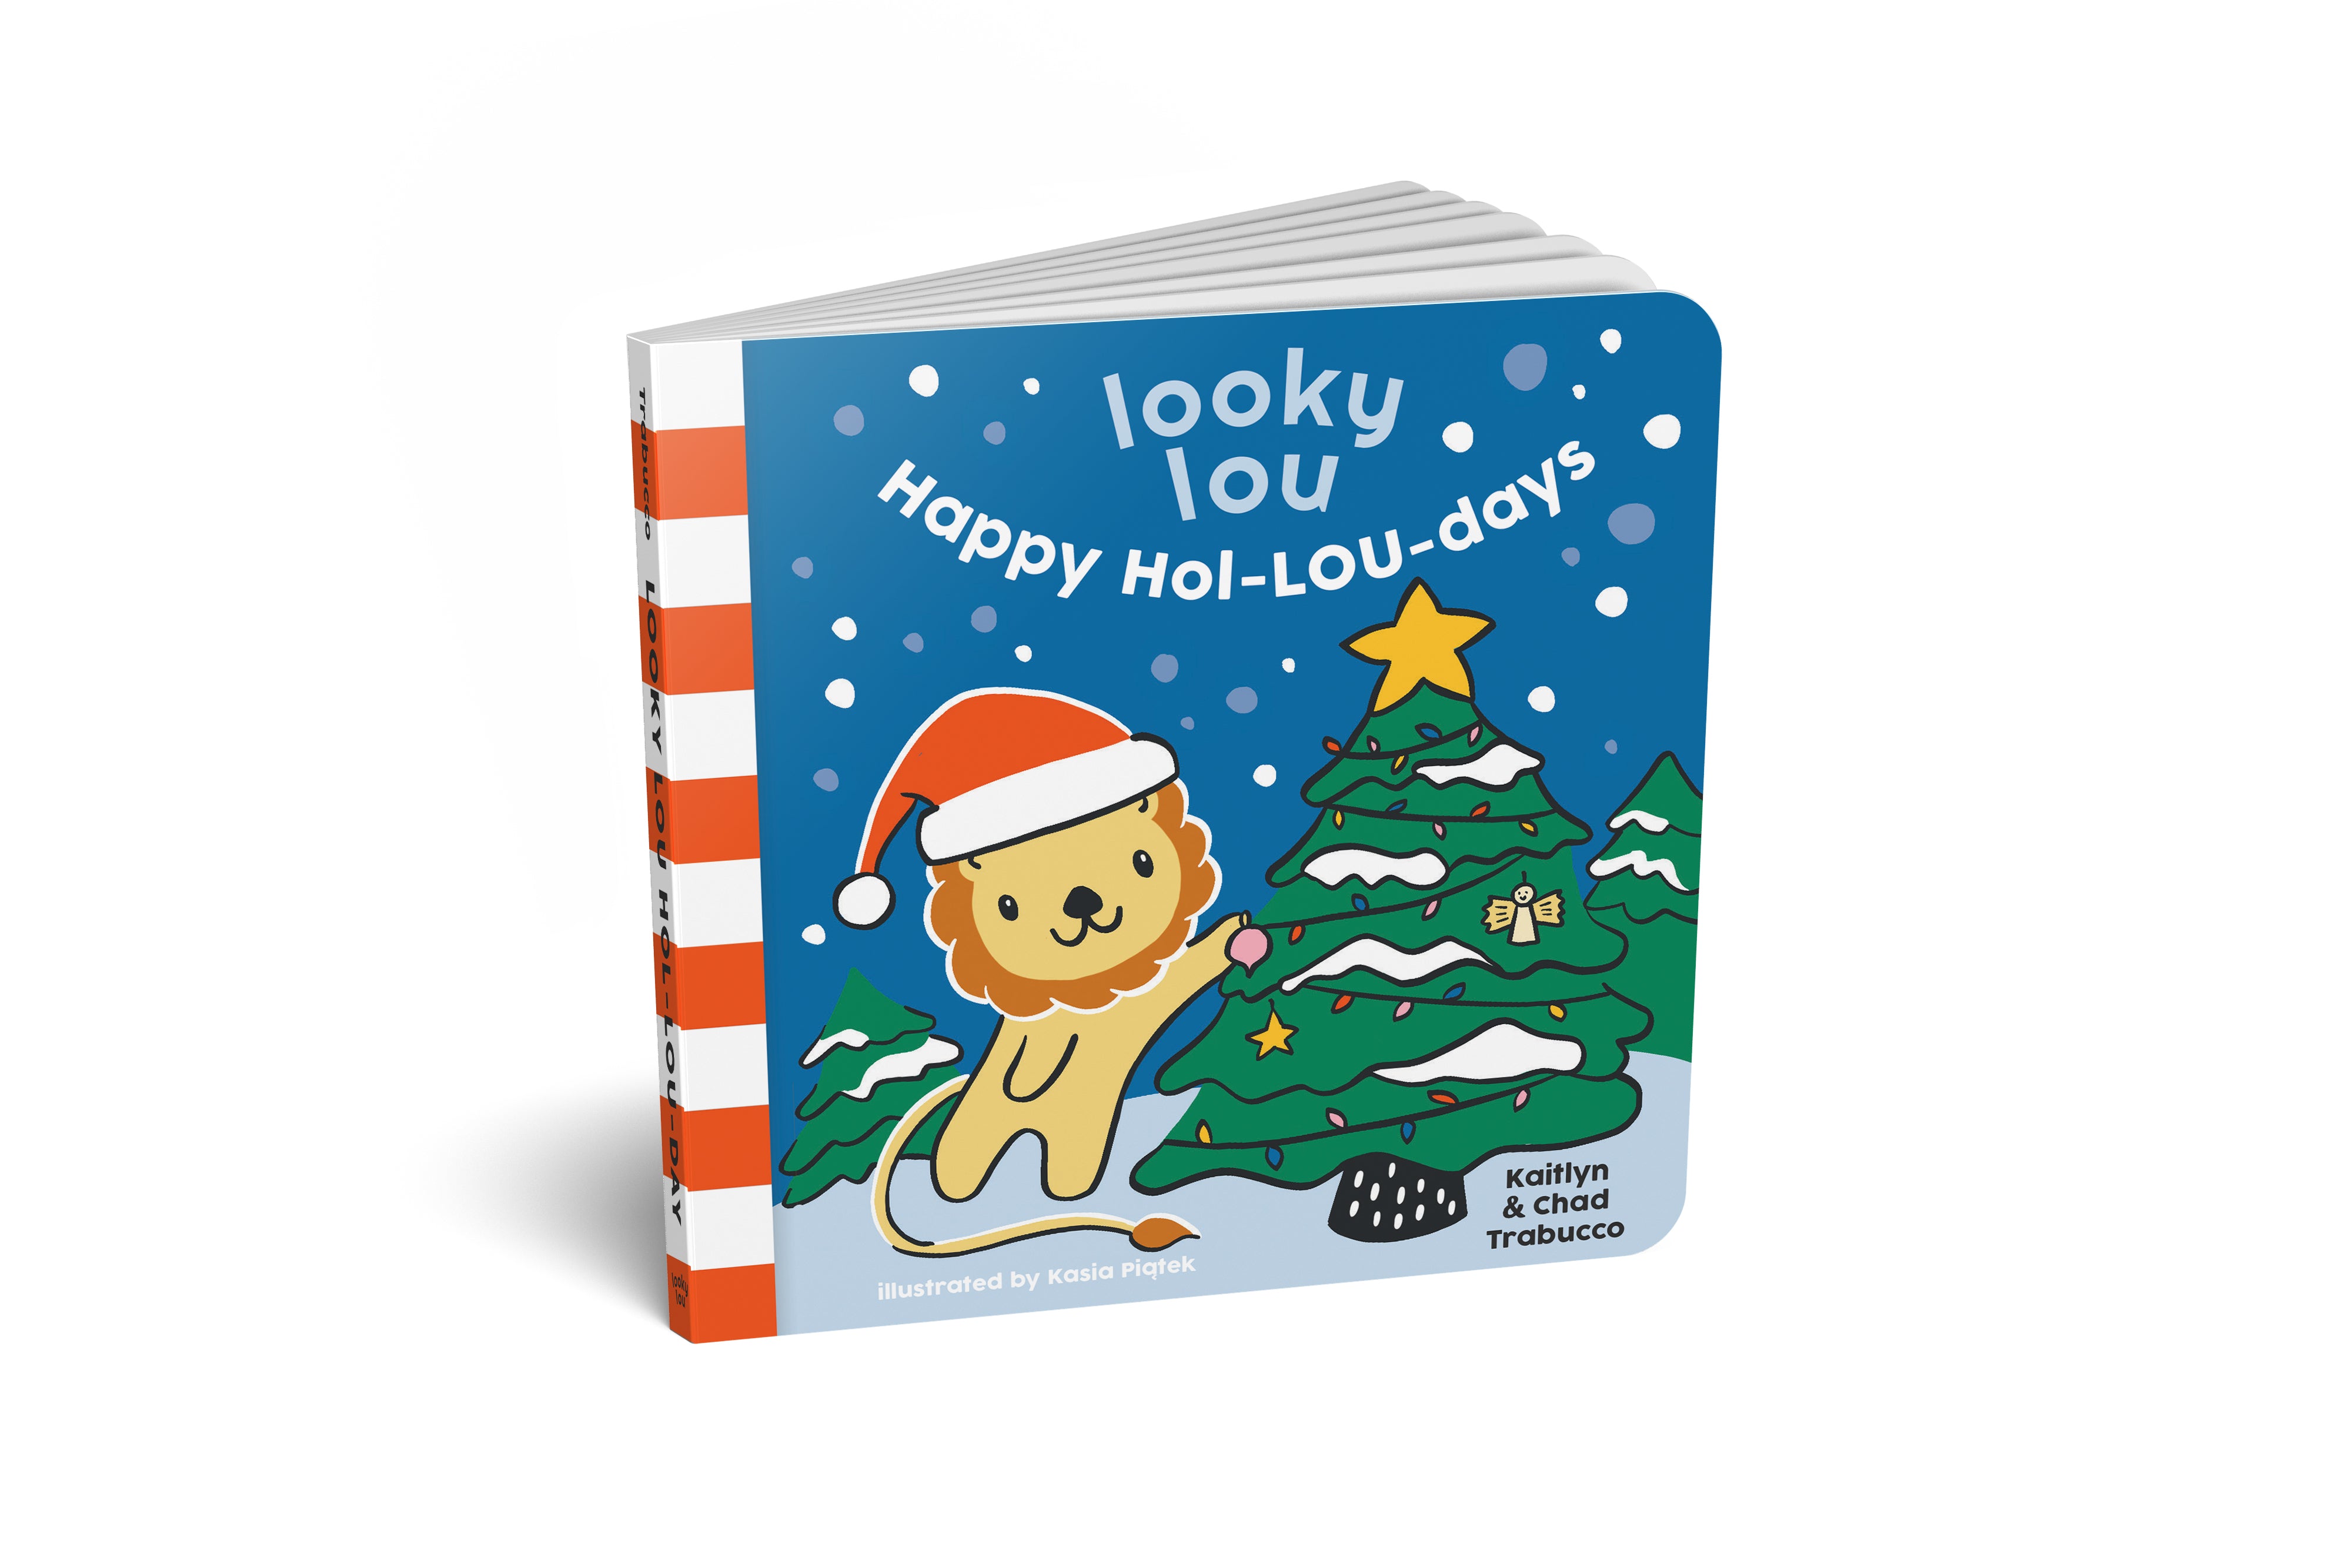 Lou Rattle & Book Gift Set – The Looky Lou